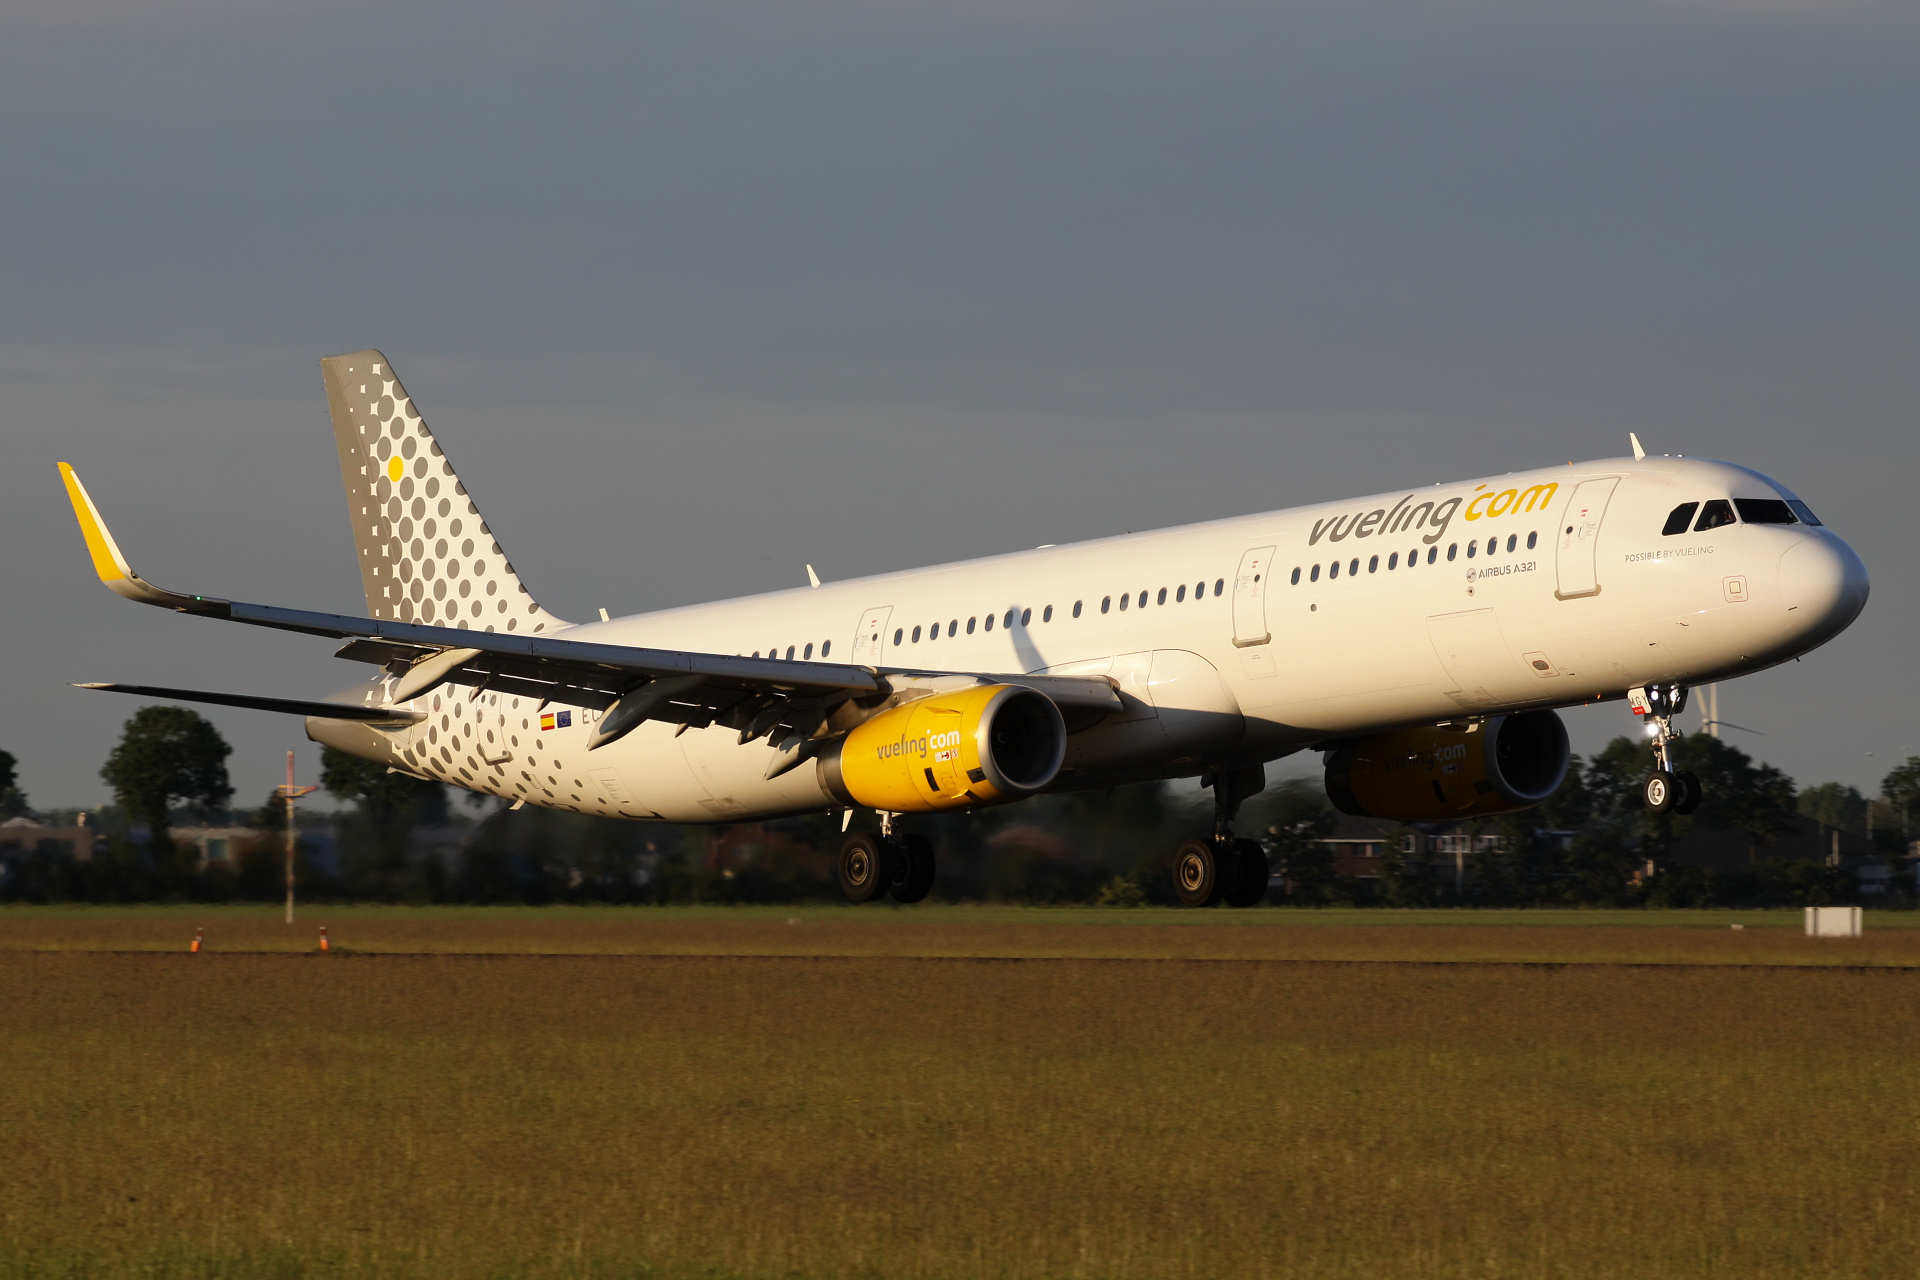 EC-MGY, Vueling Airlines (Aircraft » Schiphol Spotting » Airbus A321-200)